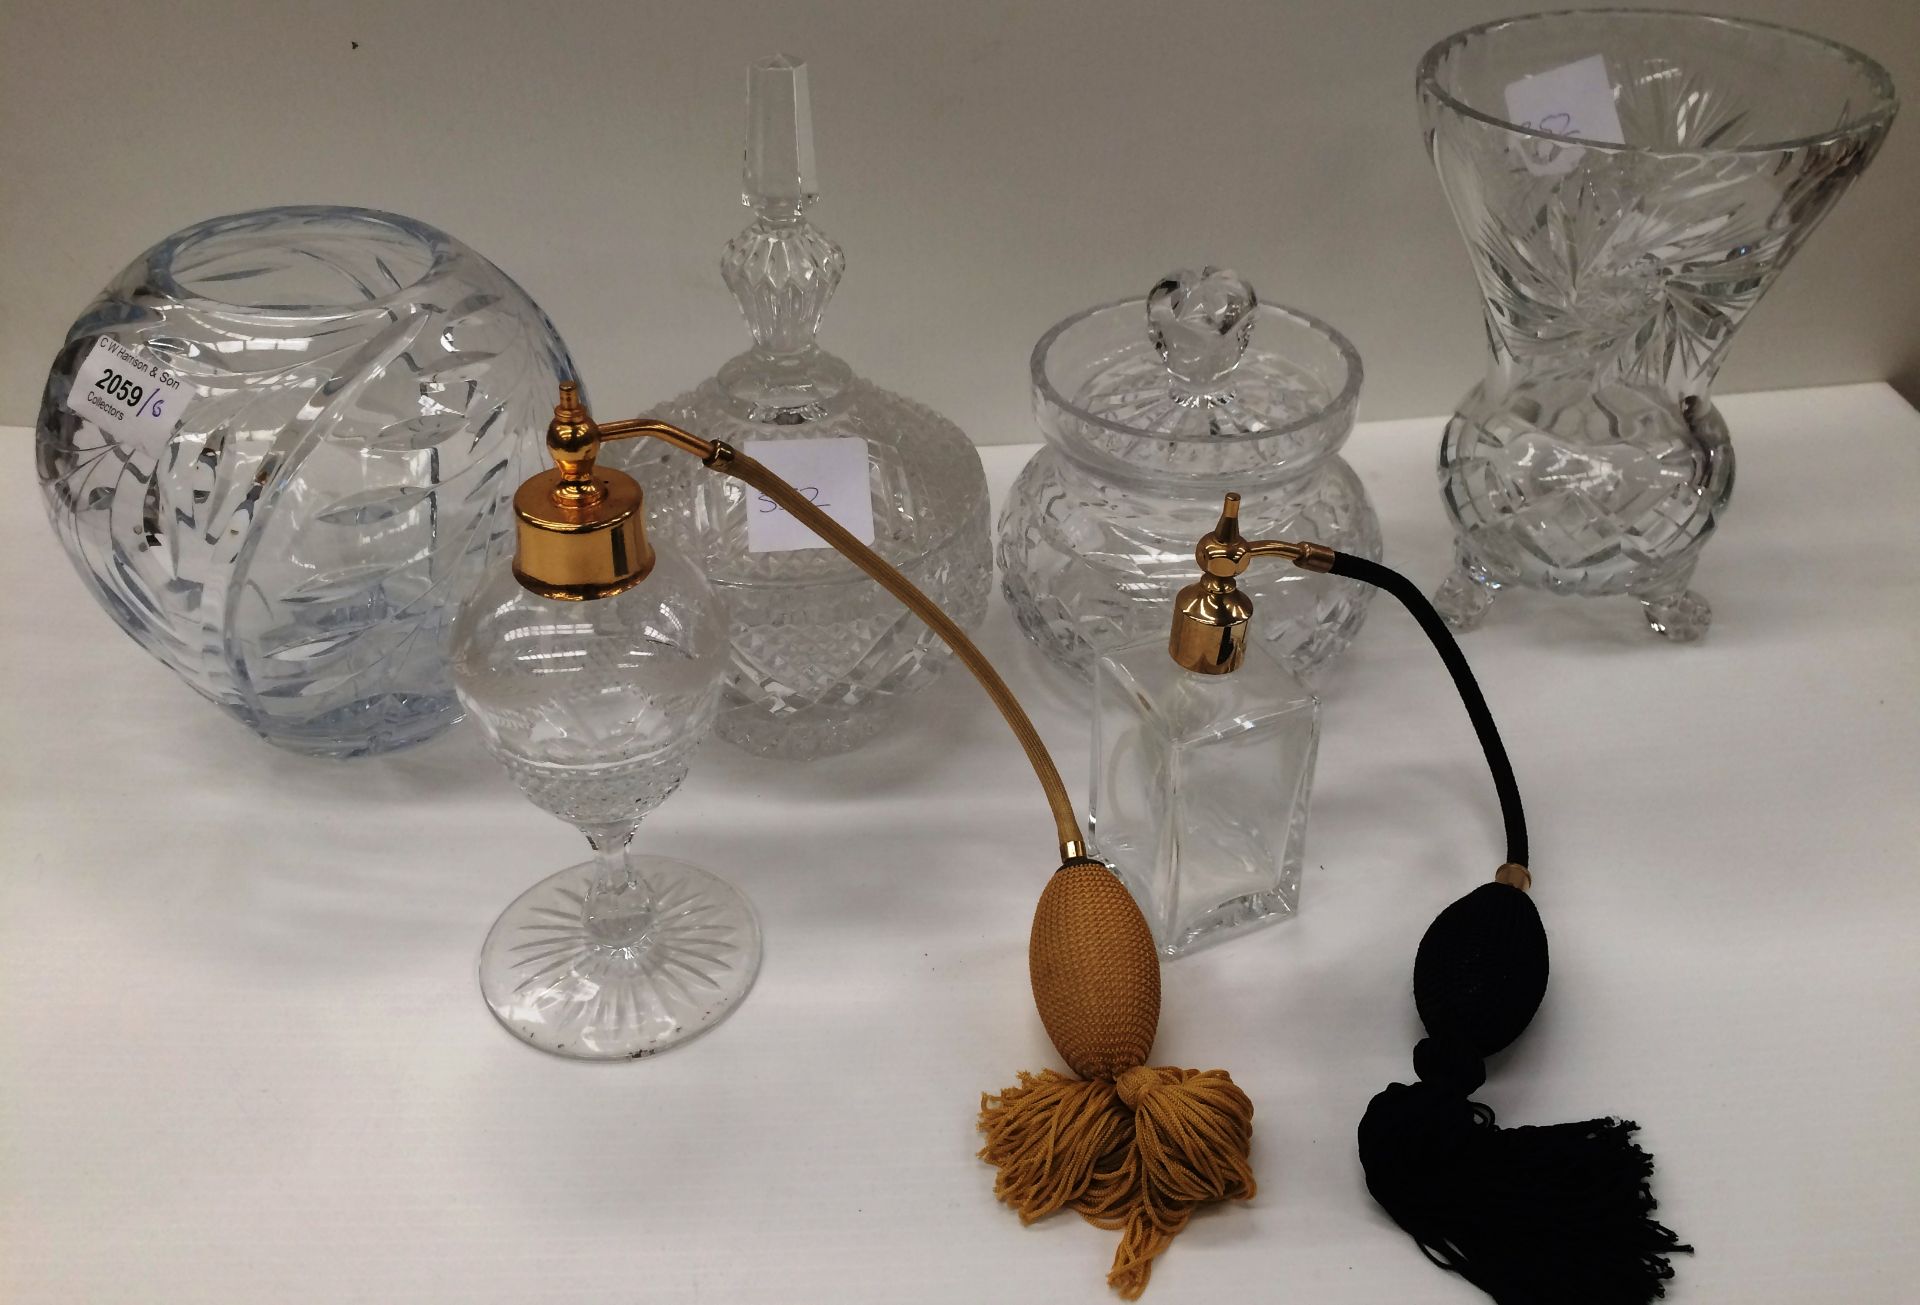 Six items - two atomizer sprays and four glass bowls and vases